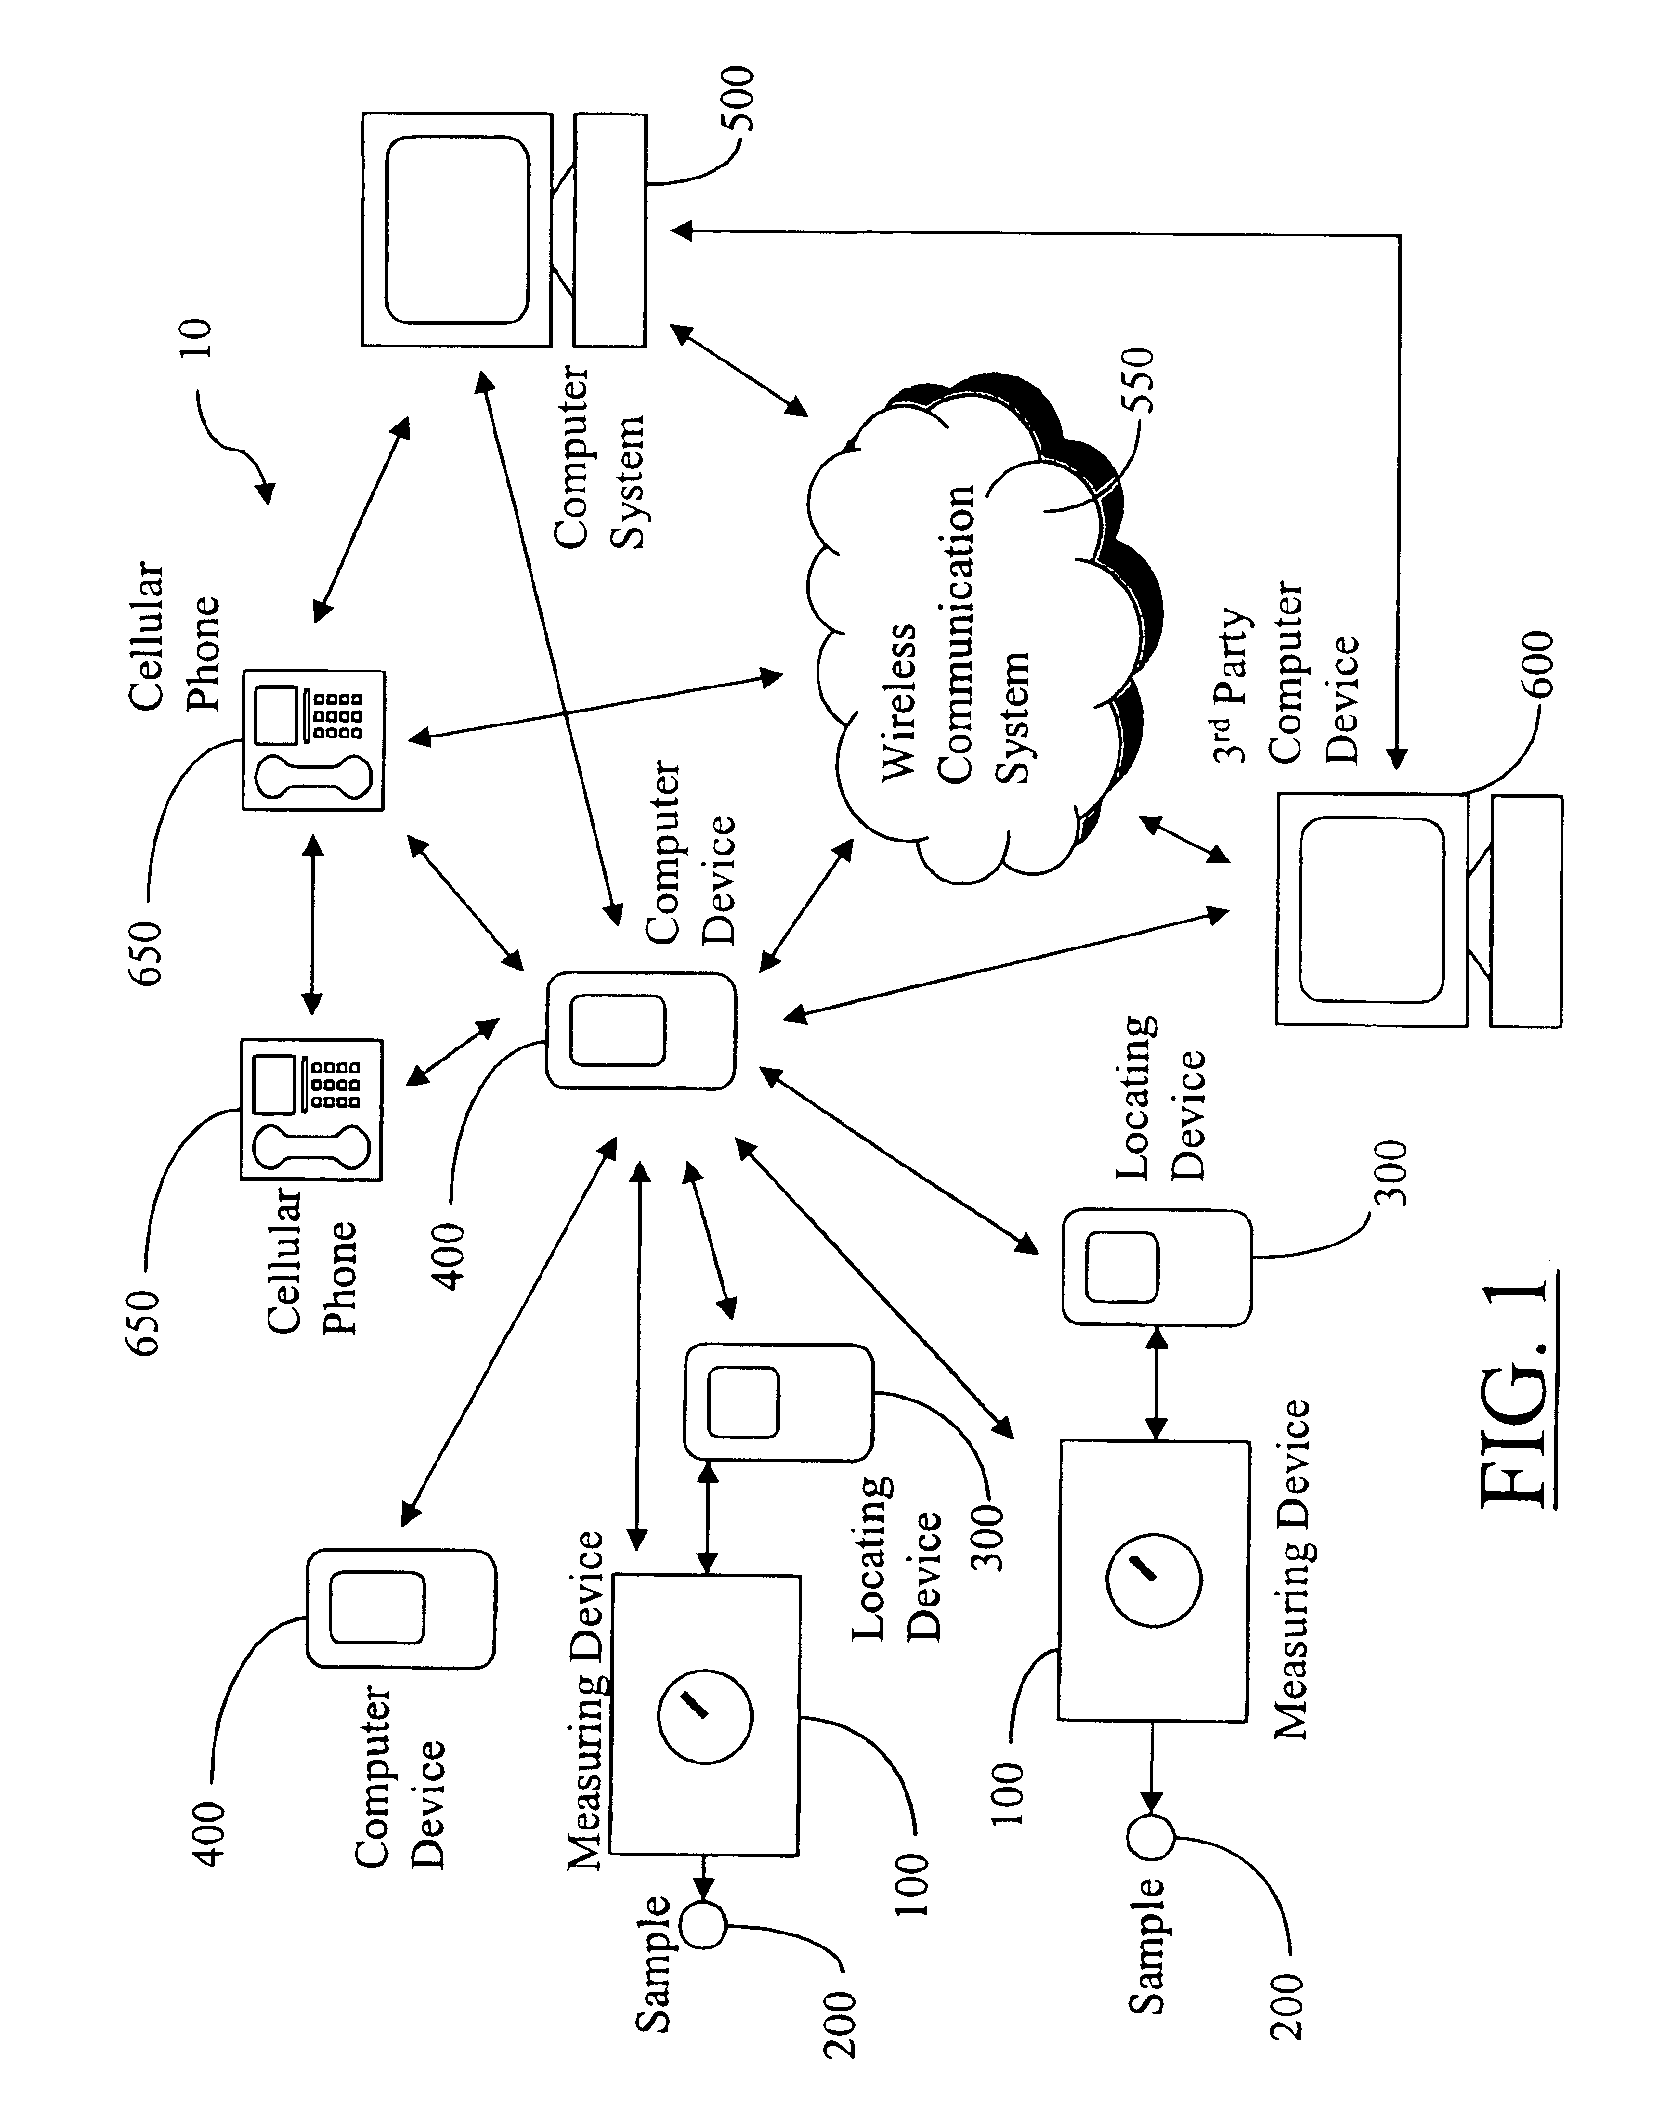 Measurement device incorporating a locating device and a portable handheld computer device and associated apparatus, system and method